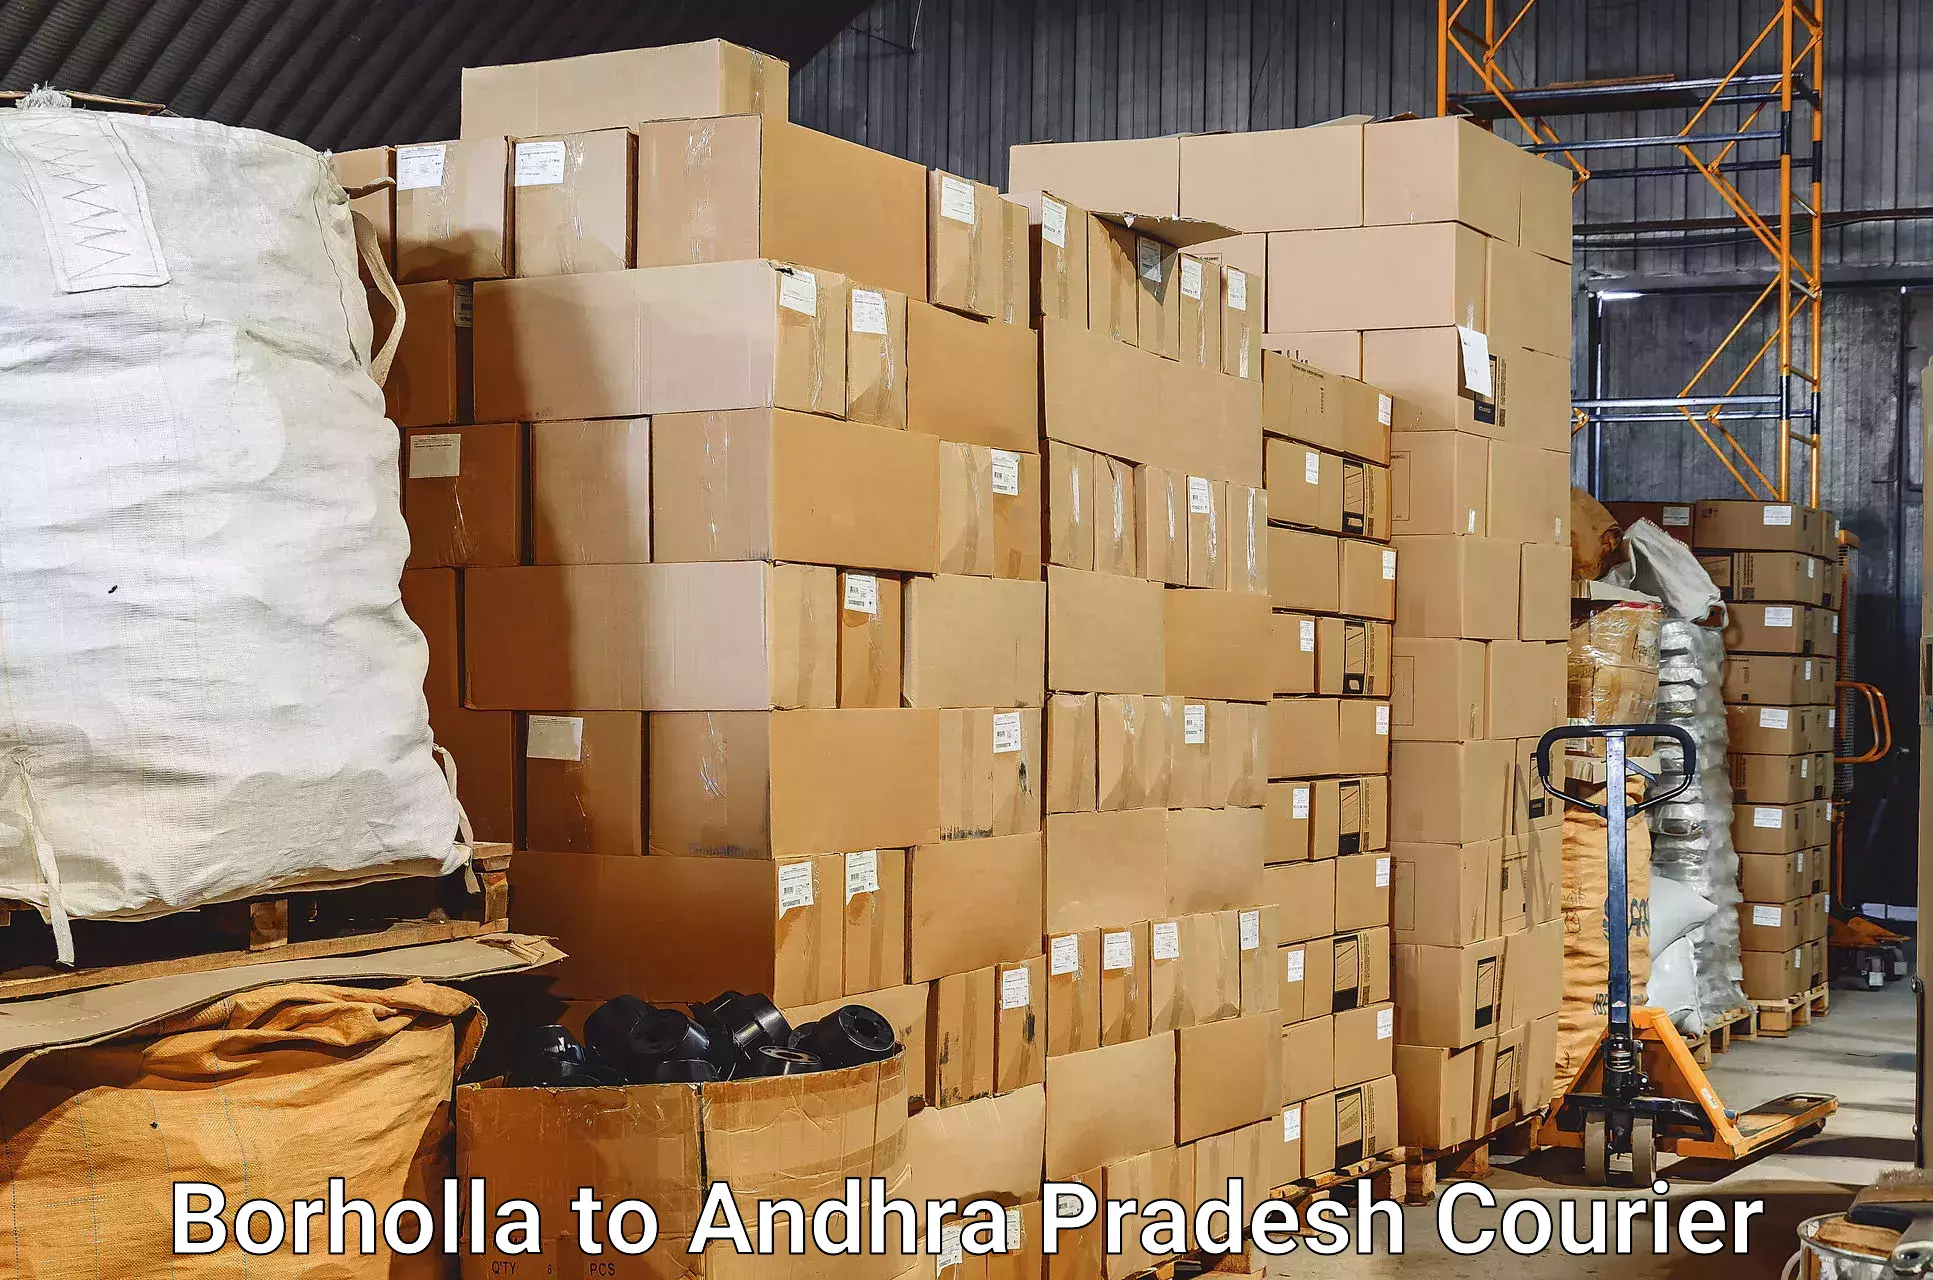 Personal effects shipping in Borholla to Mangalagiri